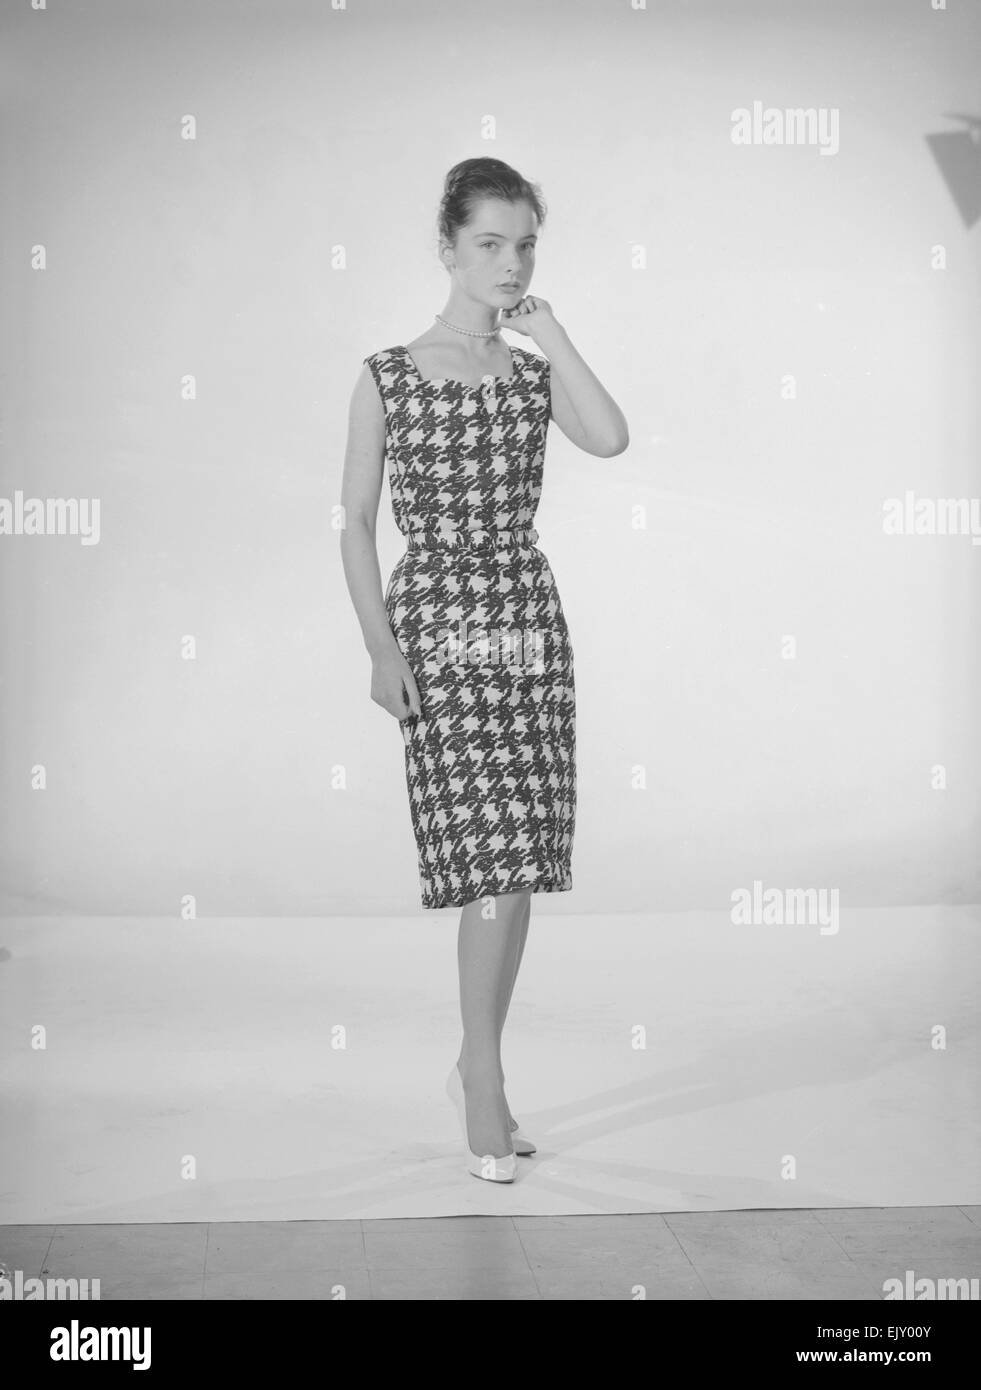 Model Jennifer Goddard. Young woman in houndstooth dress Stock Photo